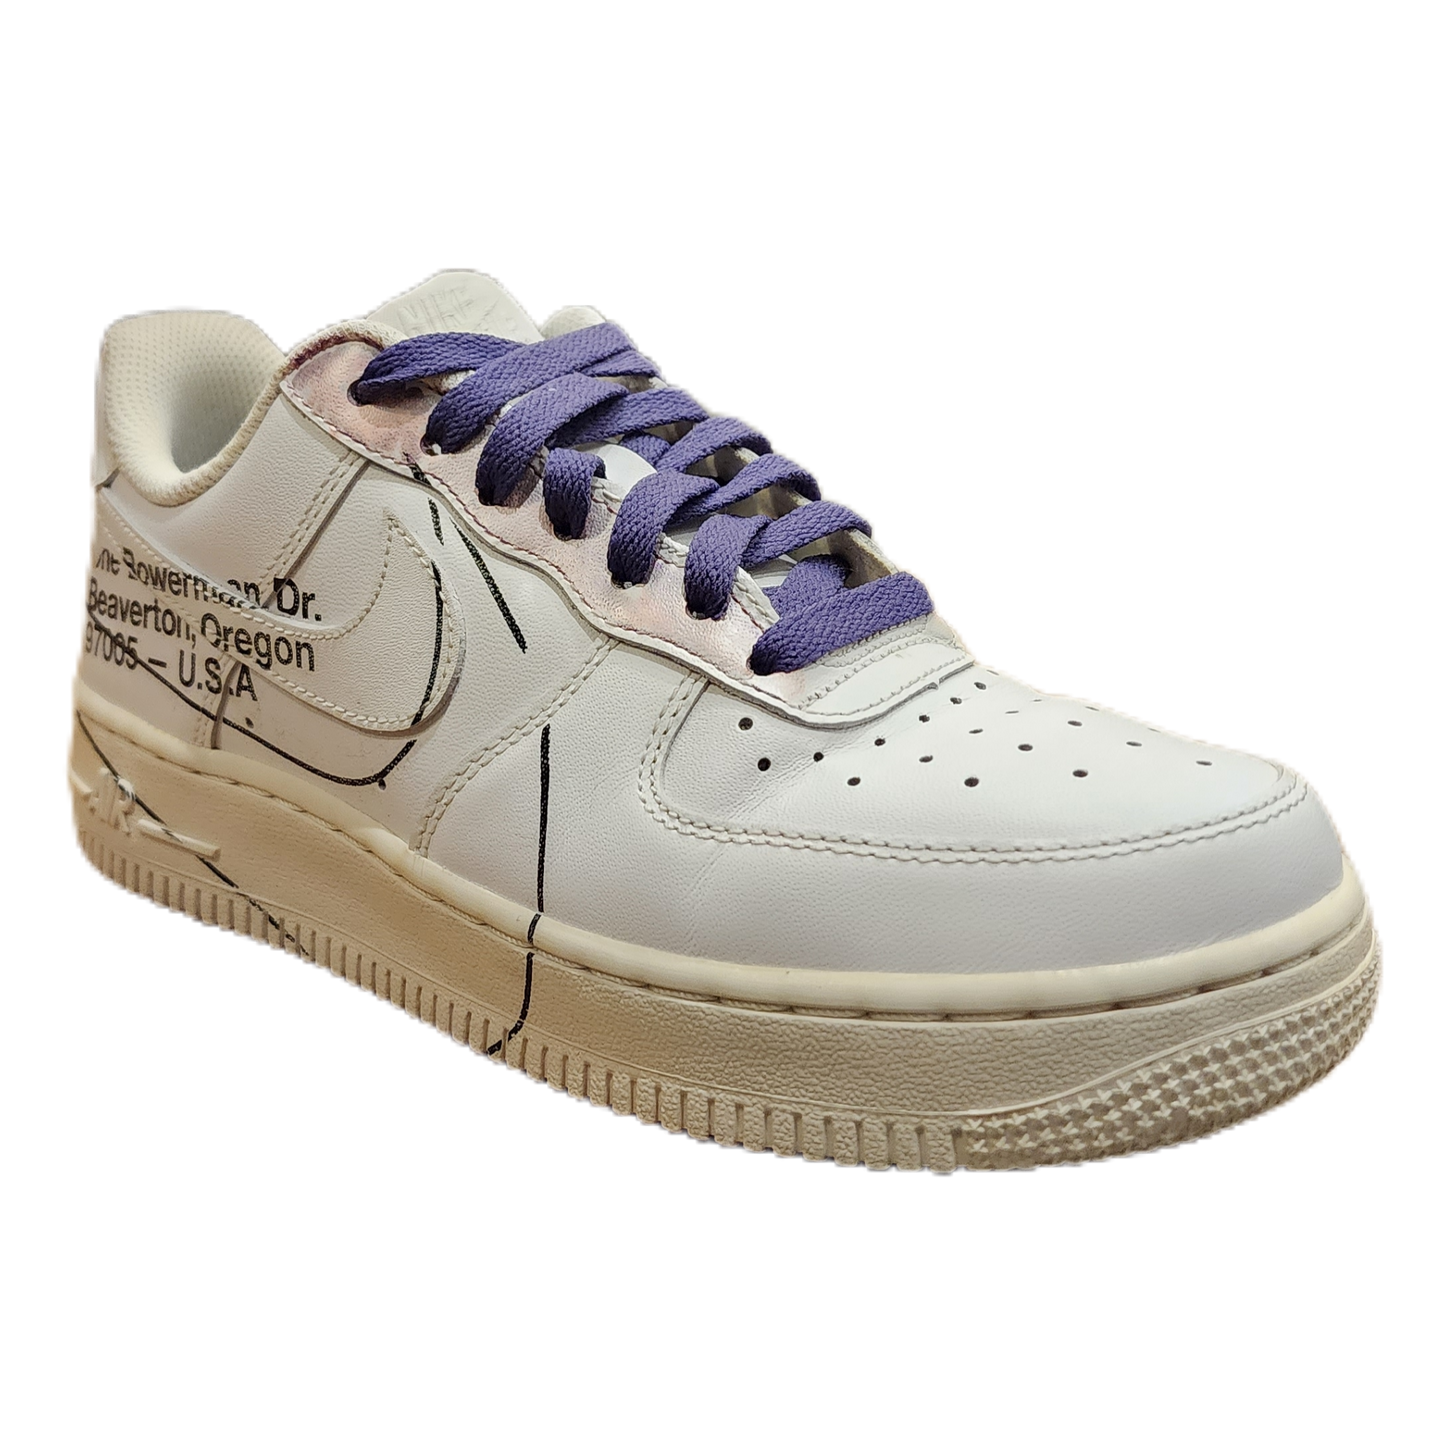 Nike Off White - "Campus Exclusive Air Force 1" - Size 6